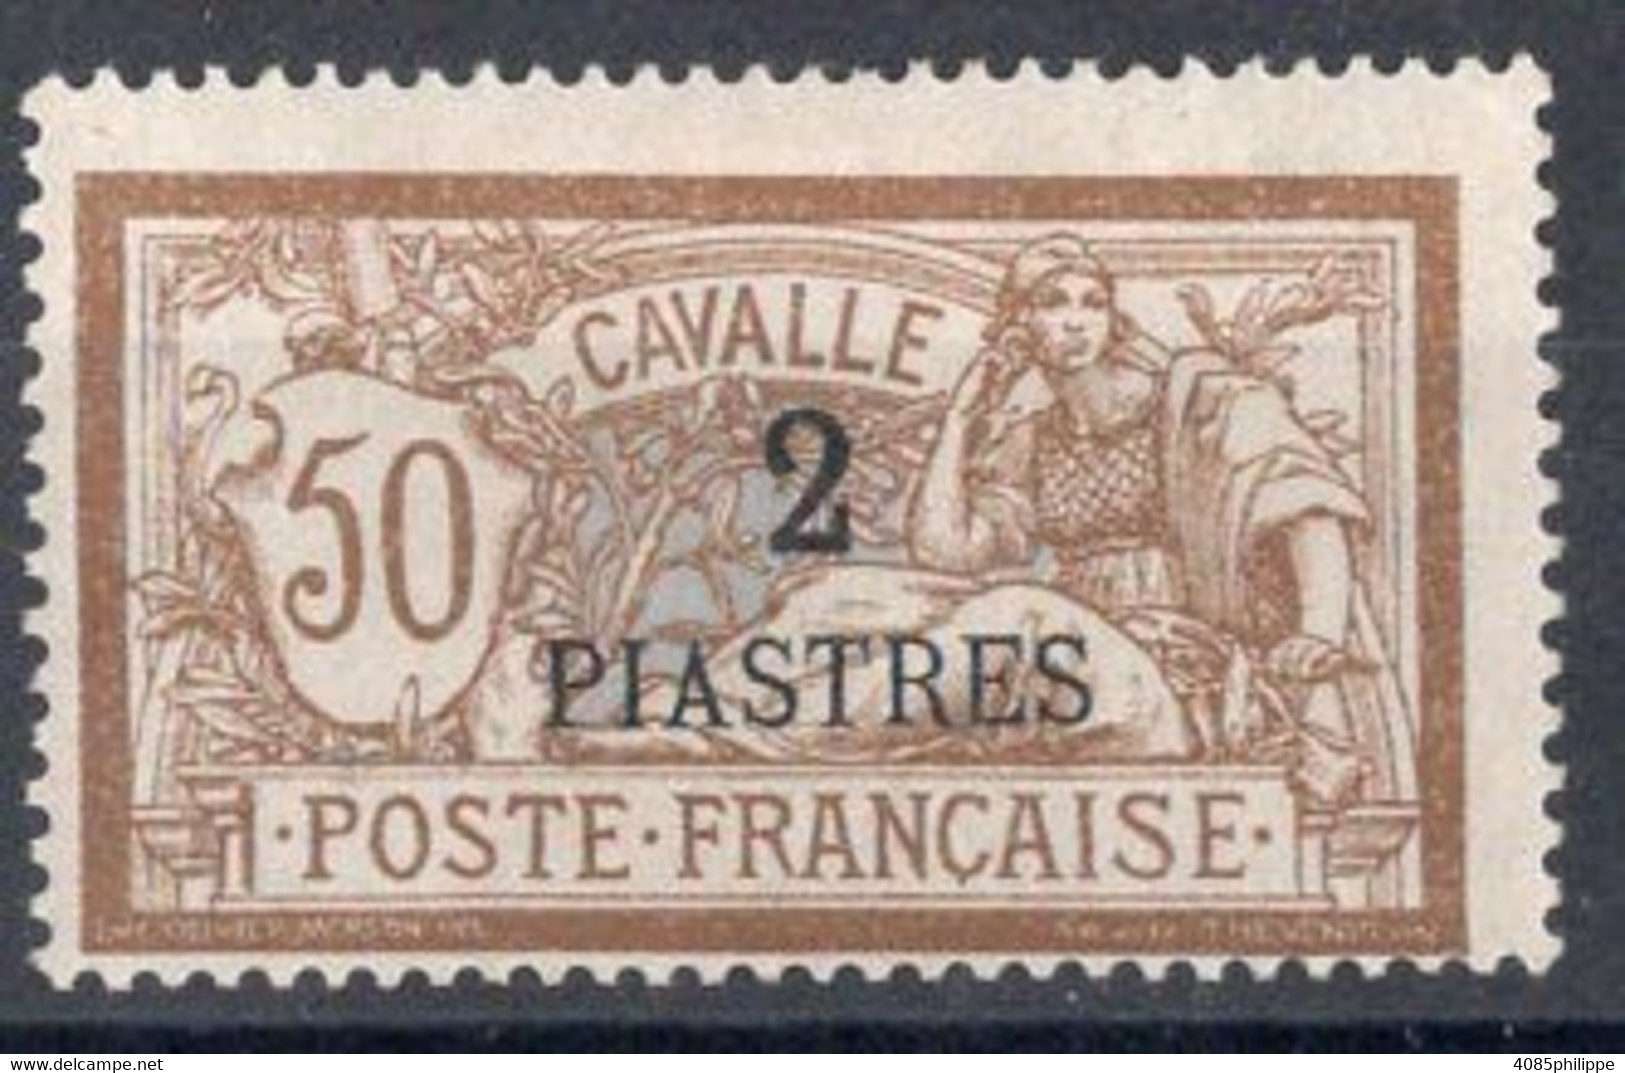 Cavalle Timbre-poste N°14*  Neuf Charnière Cote : 16€00 - Neufs